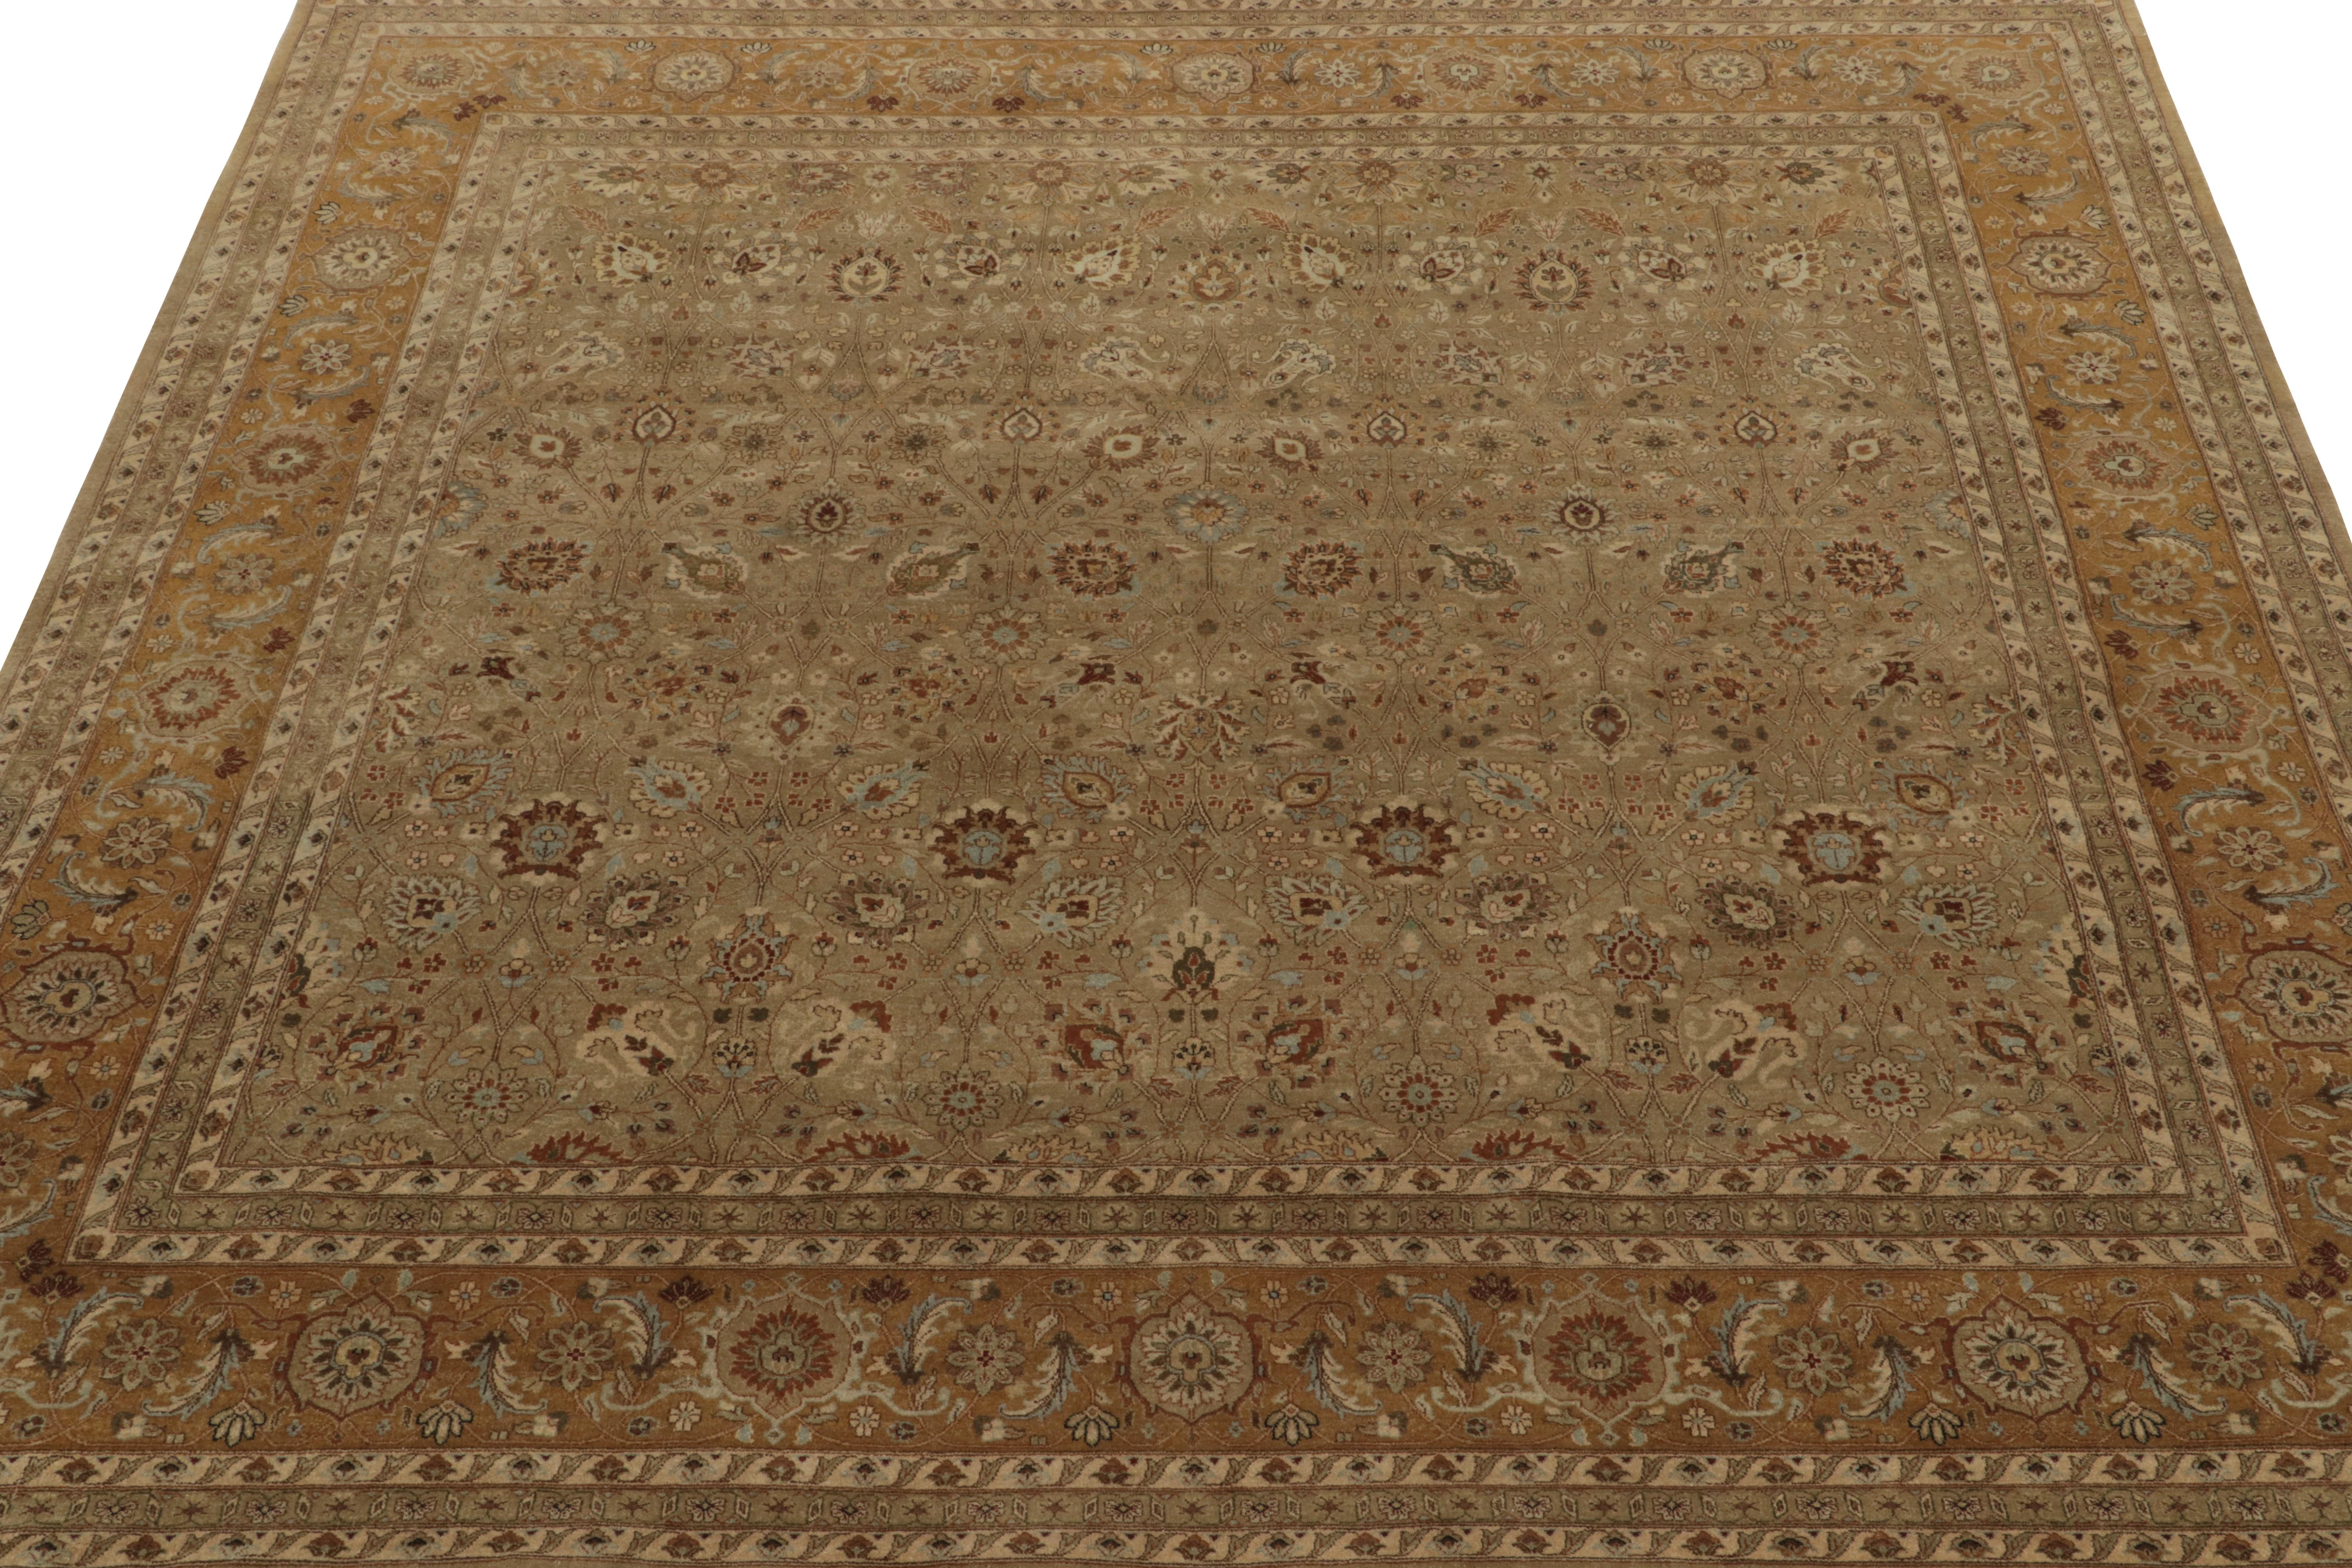 Indian Rug & Kilim’s Antique Persian style Square rug in Beige-Brown Floral Patterns For Sale